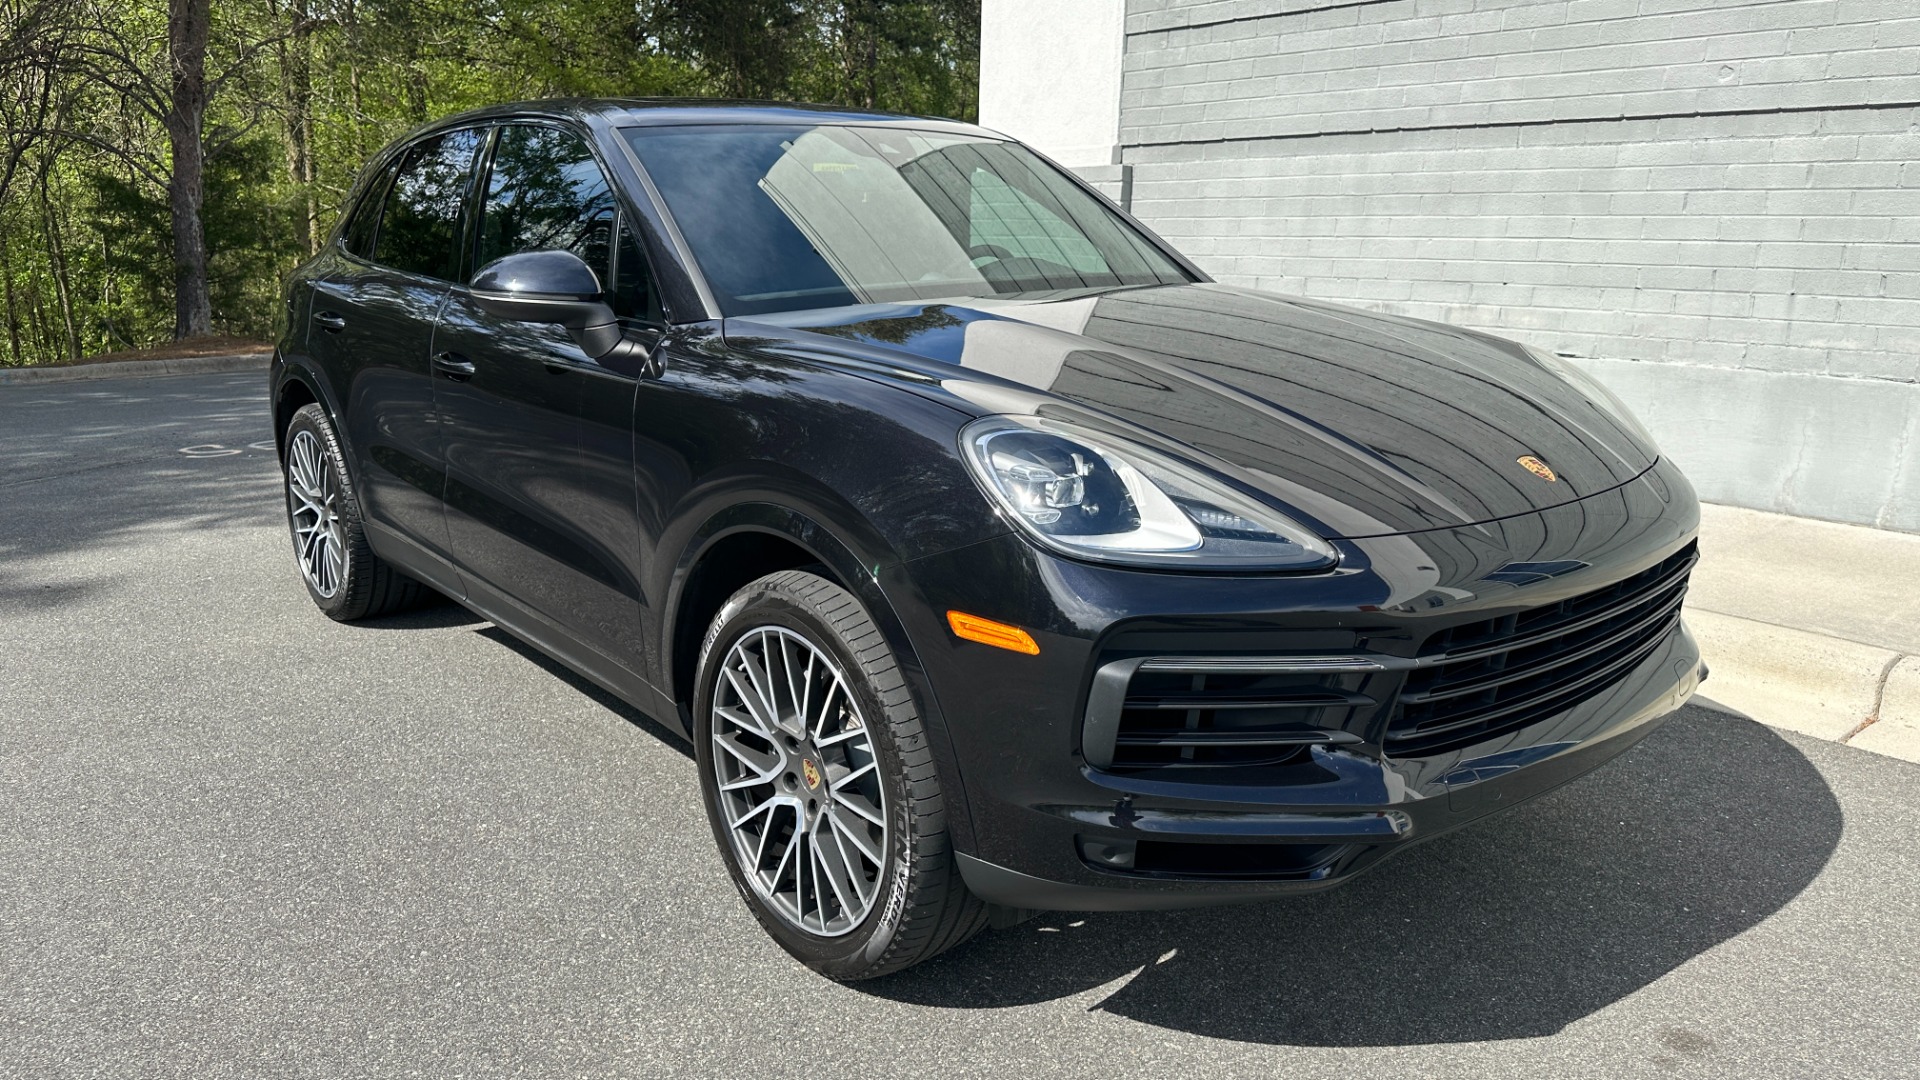 Used 2019 Porsche Cayenne AWD / PREMIUM / TOWING PKG / BOSE AUDIO / GLOSS BLACK TRIM for sale $54,995 at Formula Imports in Charlotte NC 28227 2